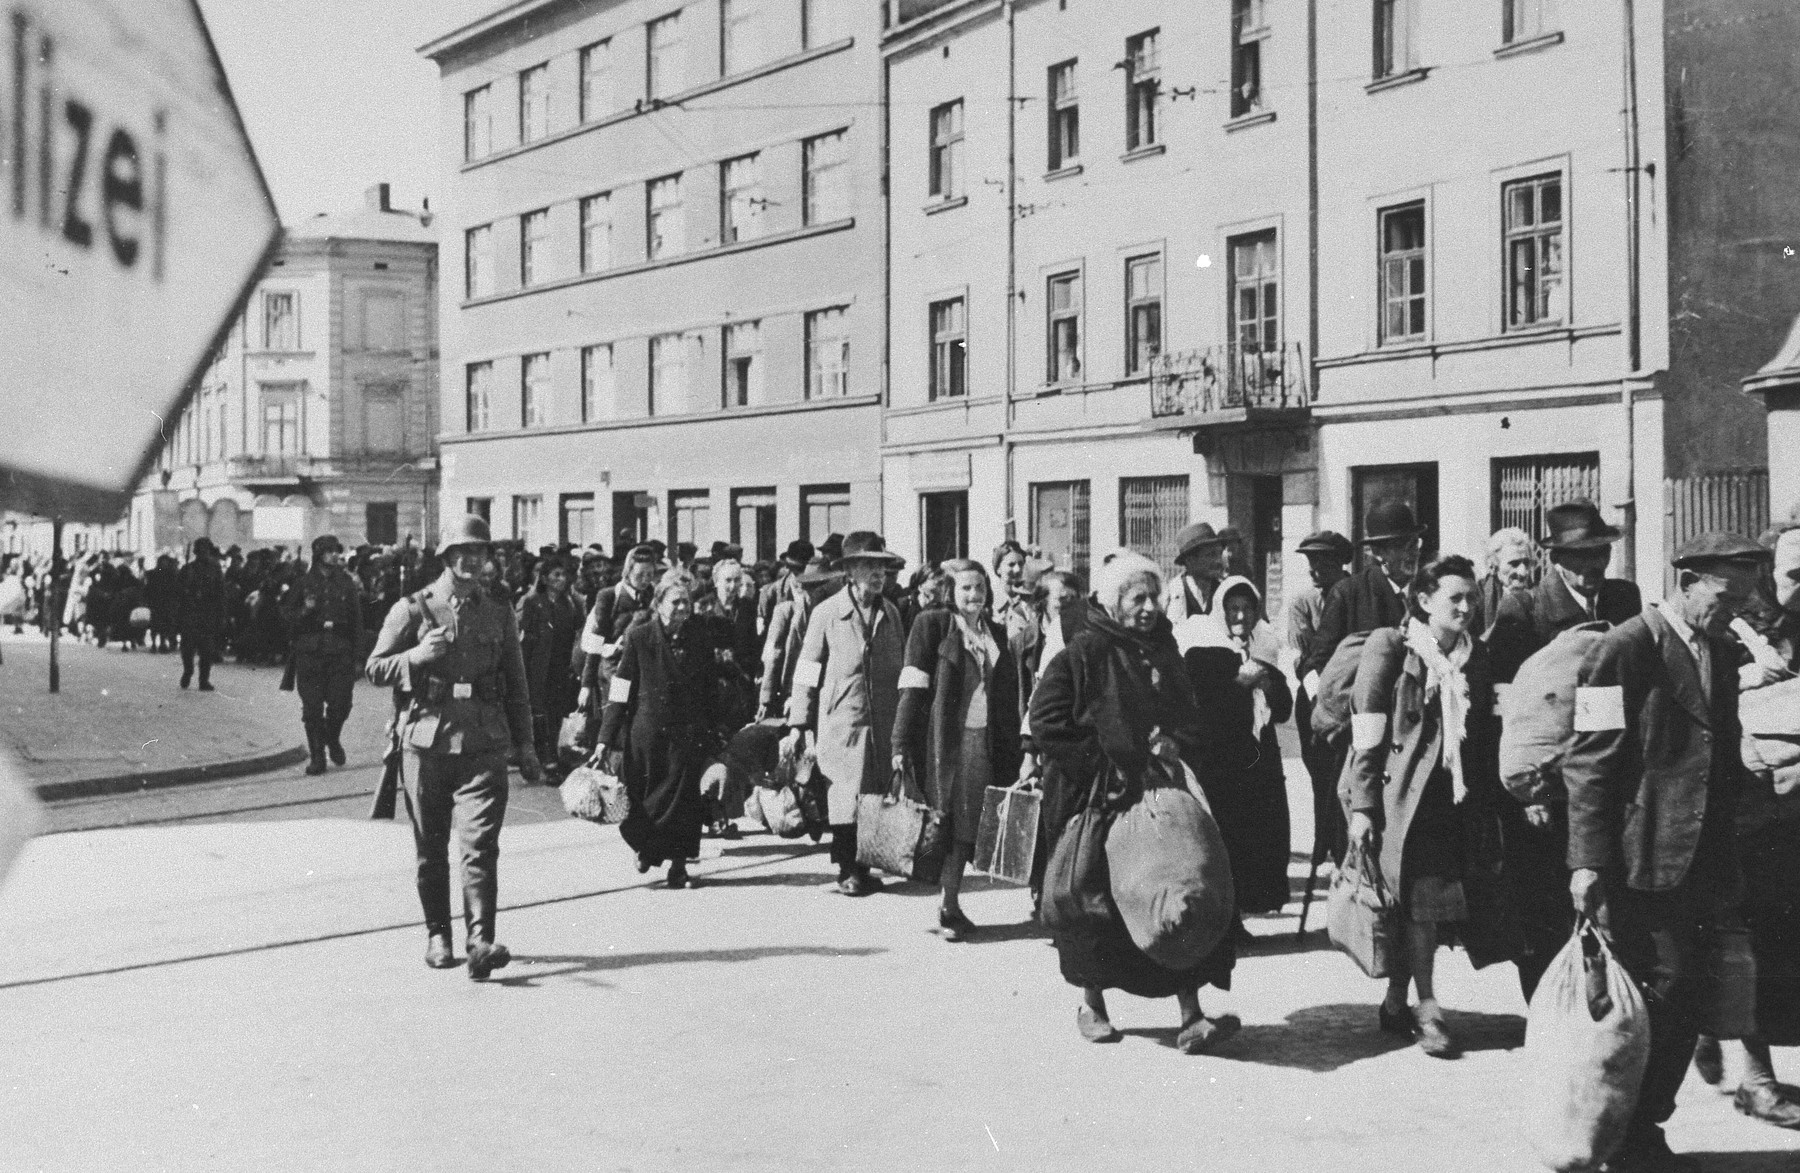 A column of Jews march with bundles down a main street in Krakow during the liquidation of the ghetto.  SS guards oversee the deportation action.